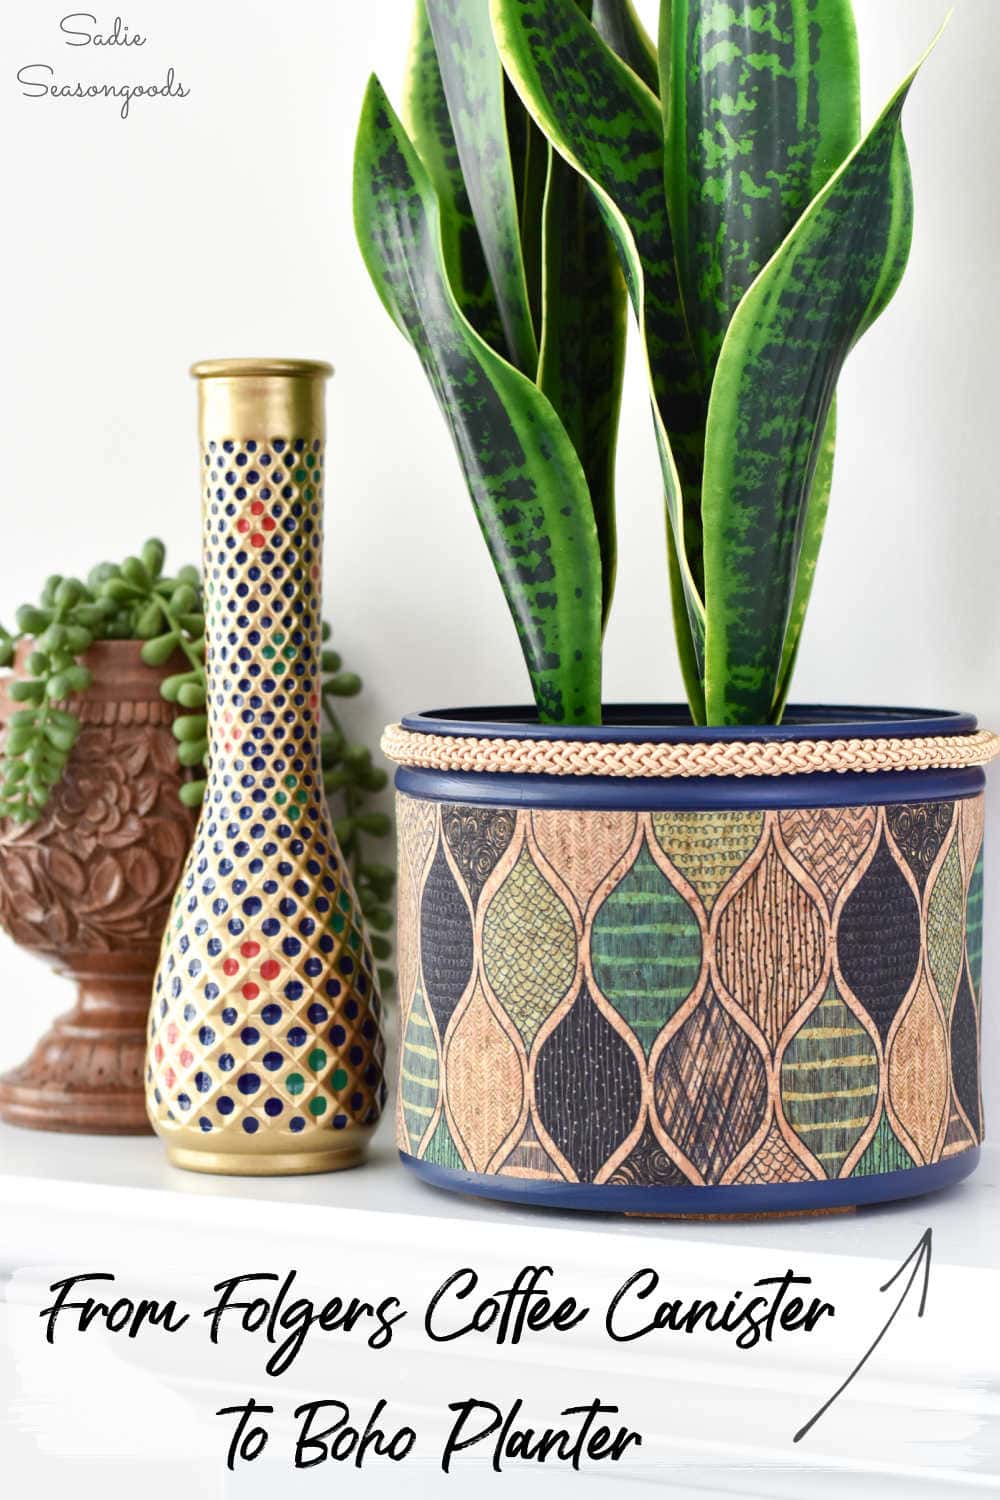 boho planter and coffee can crafts